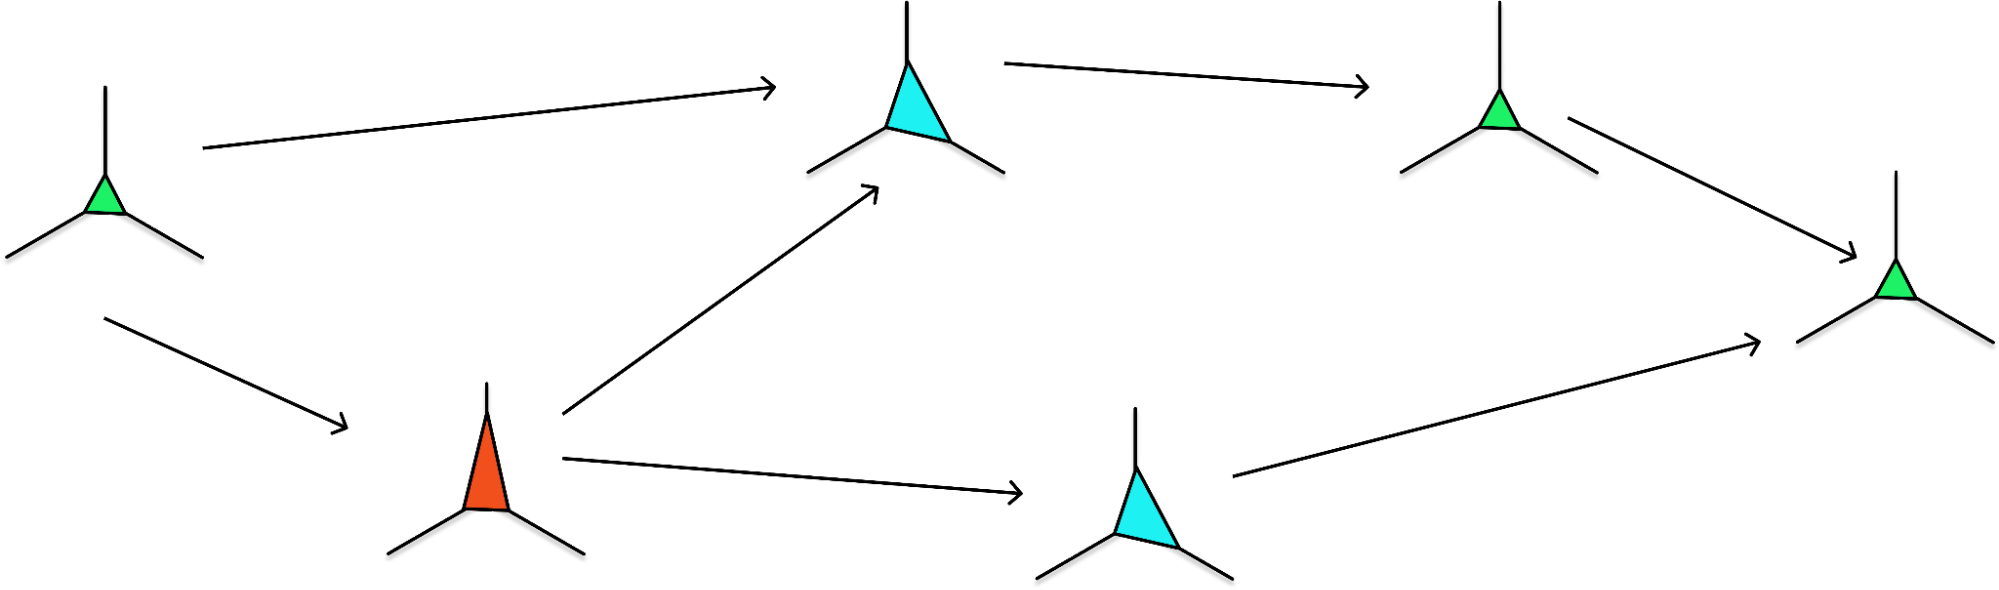 The three dimensions along which a task definition can vary